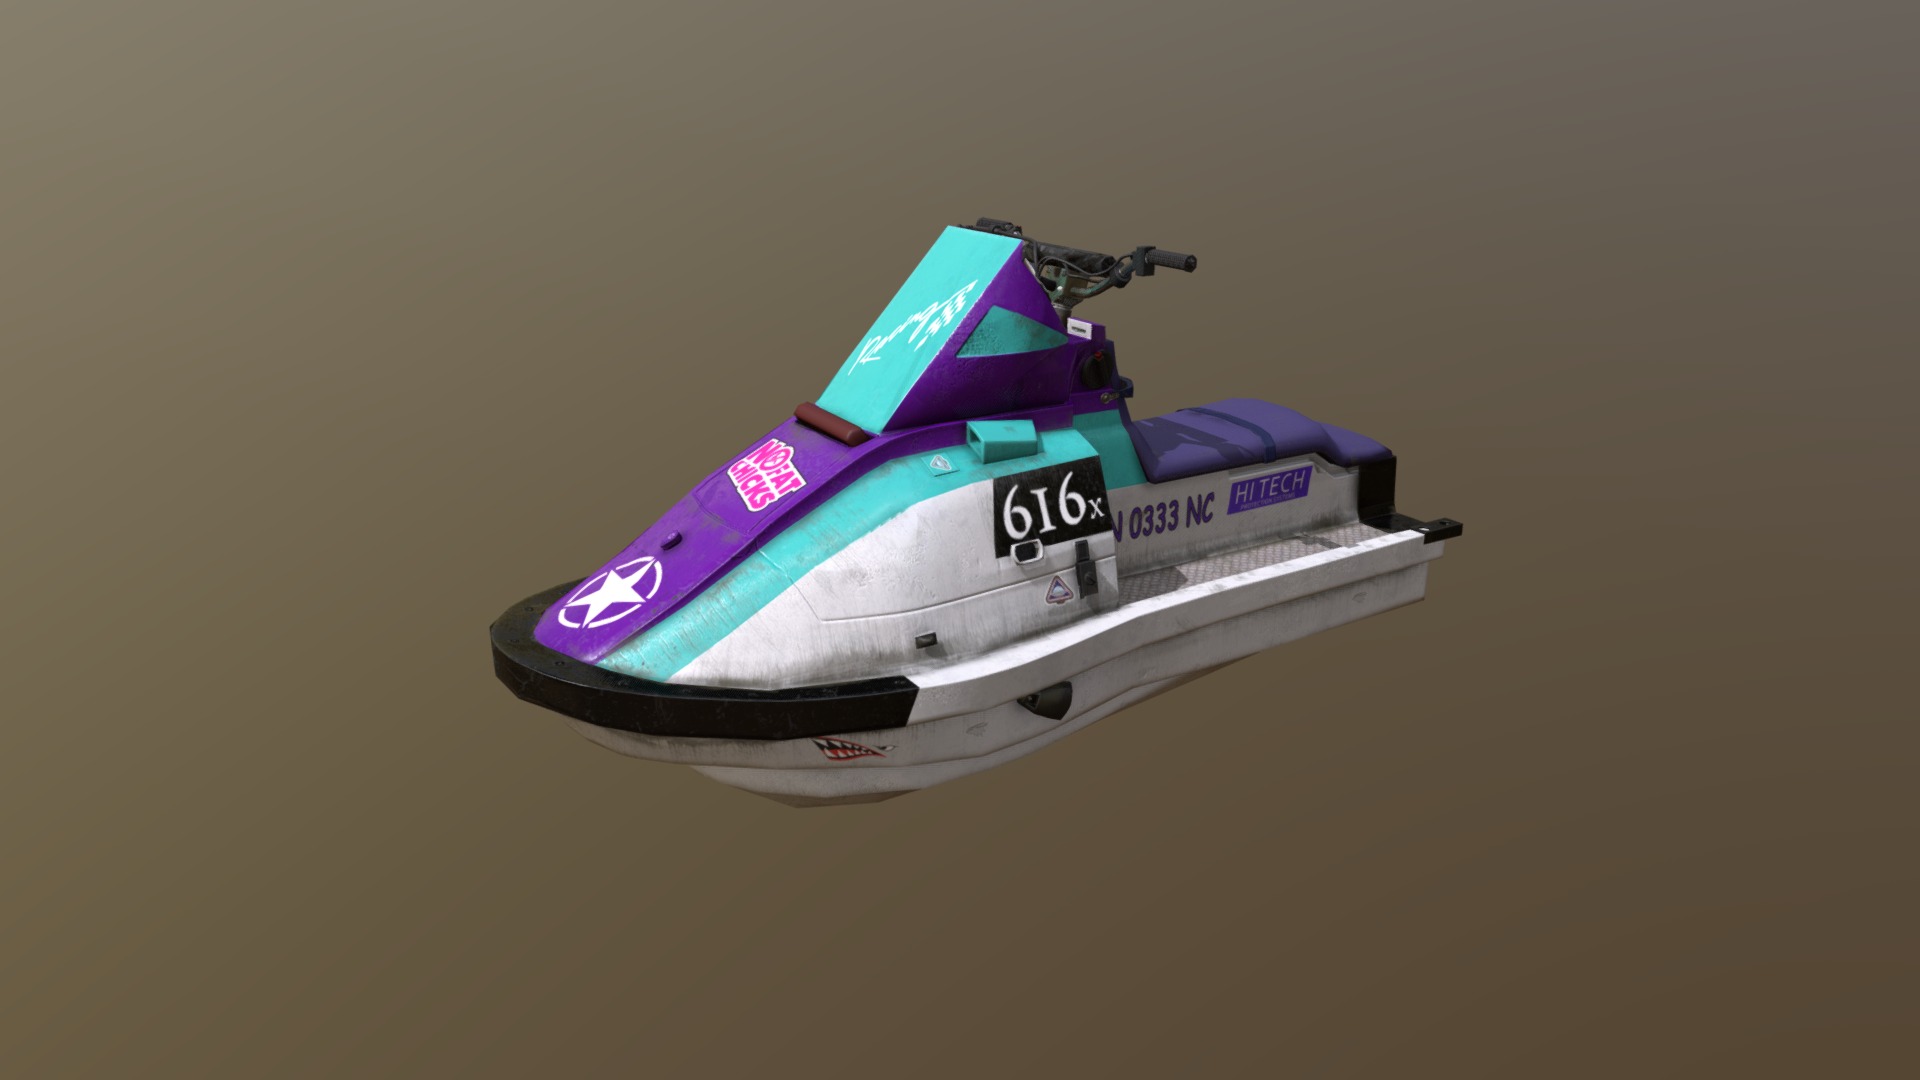 3D model Ski Jet - This is a 3D model of the Ski Jet. The 3D model is about a jet ski on a table.